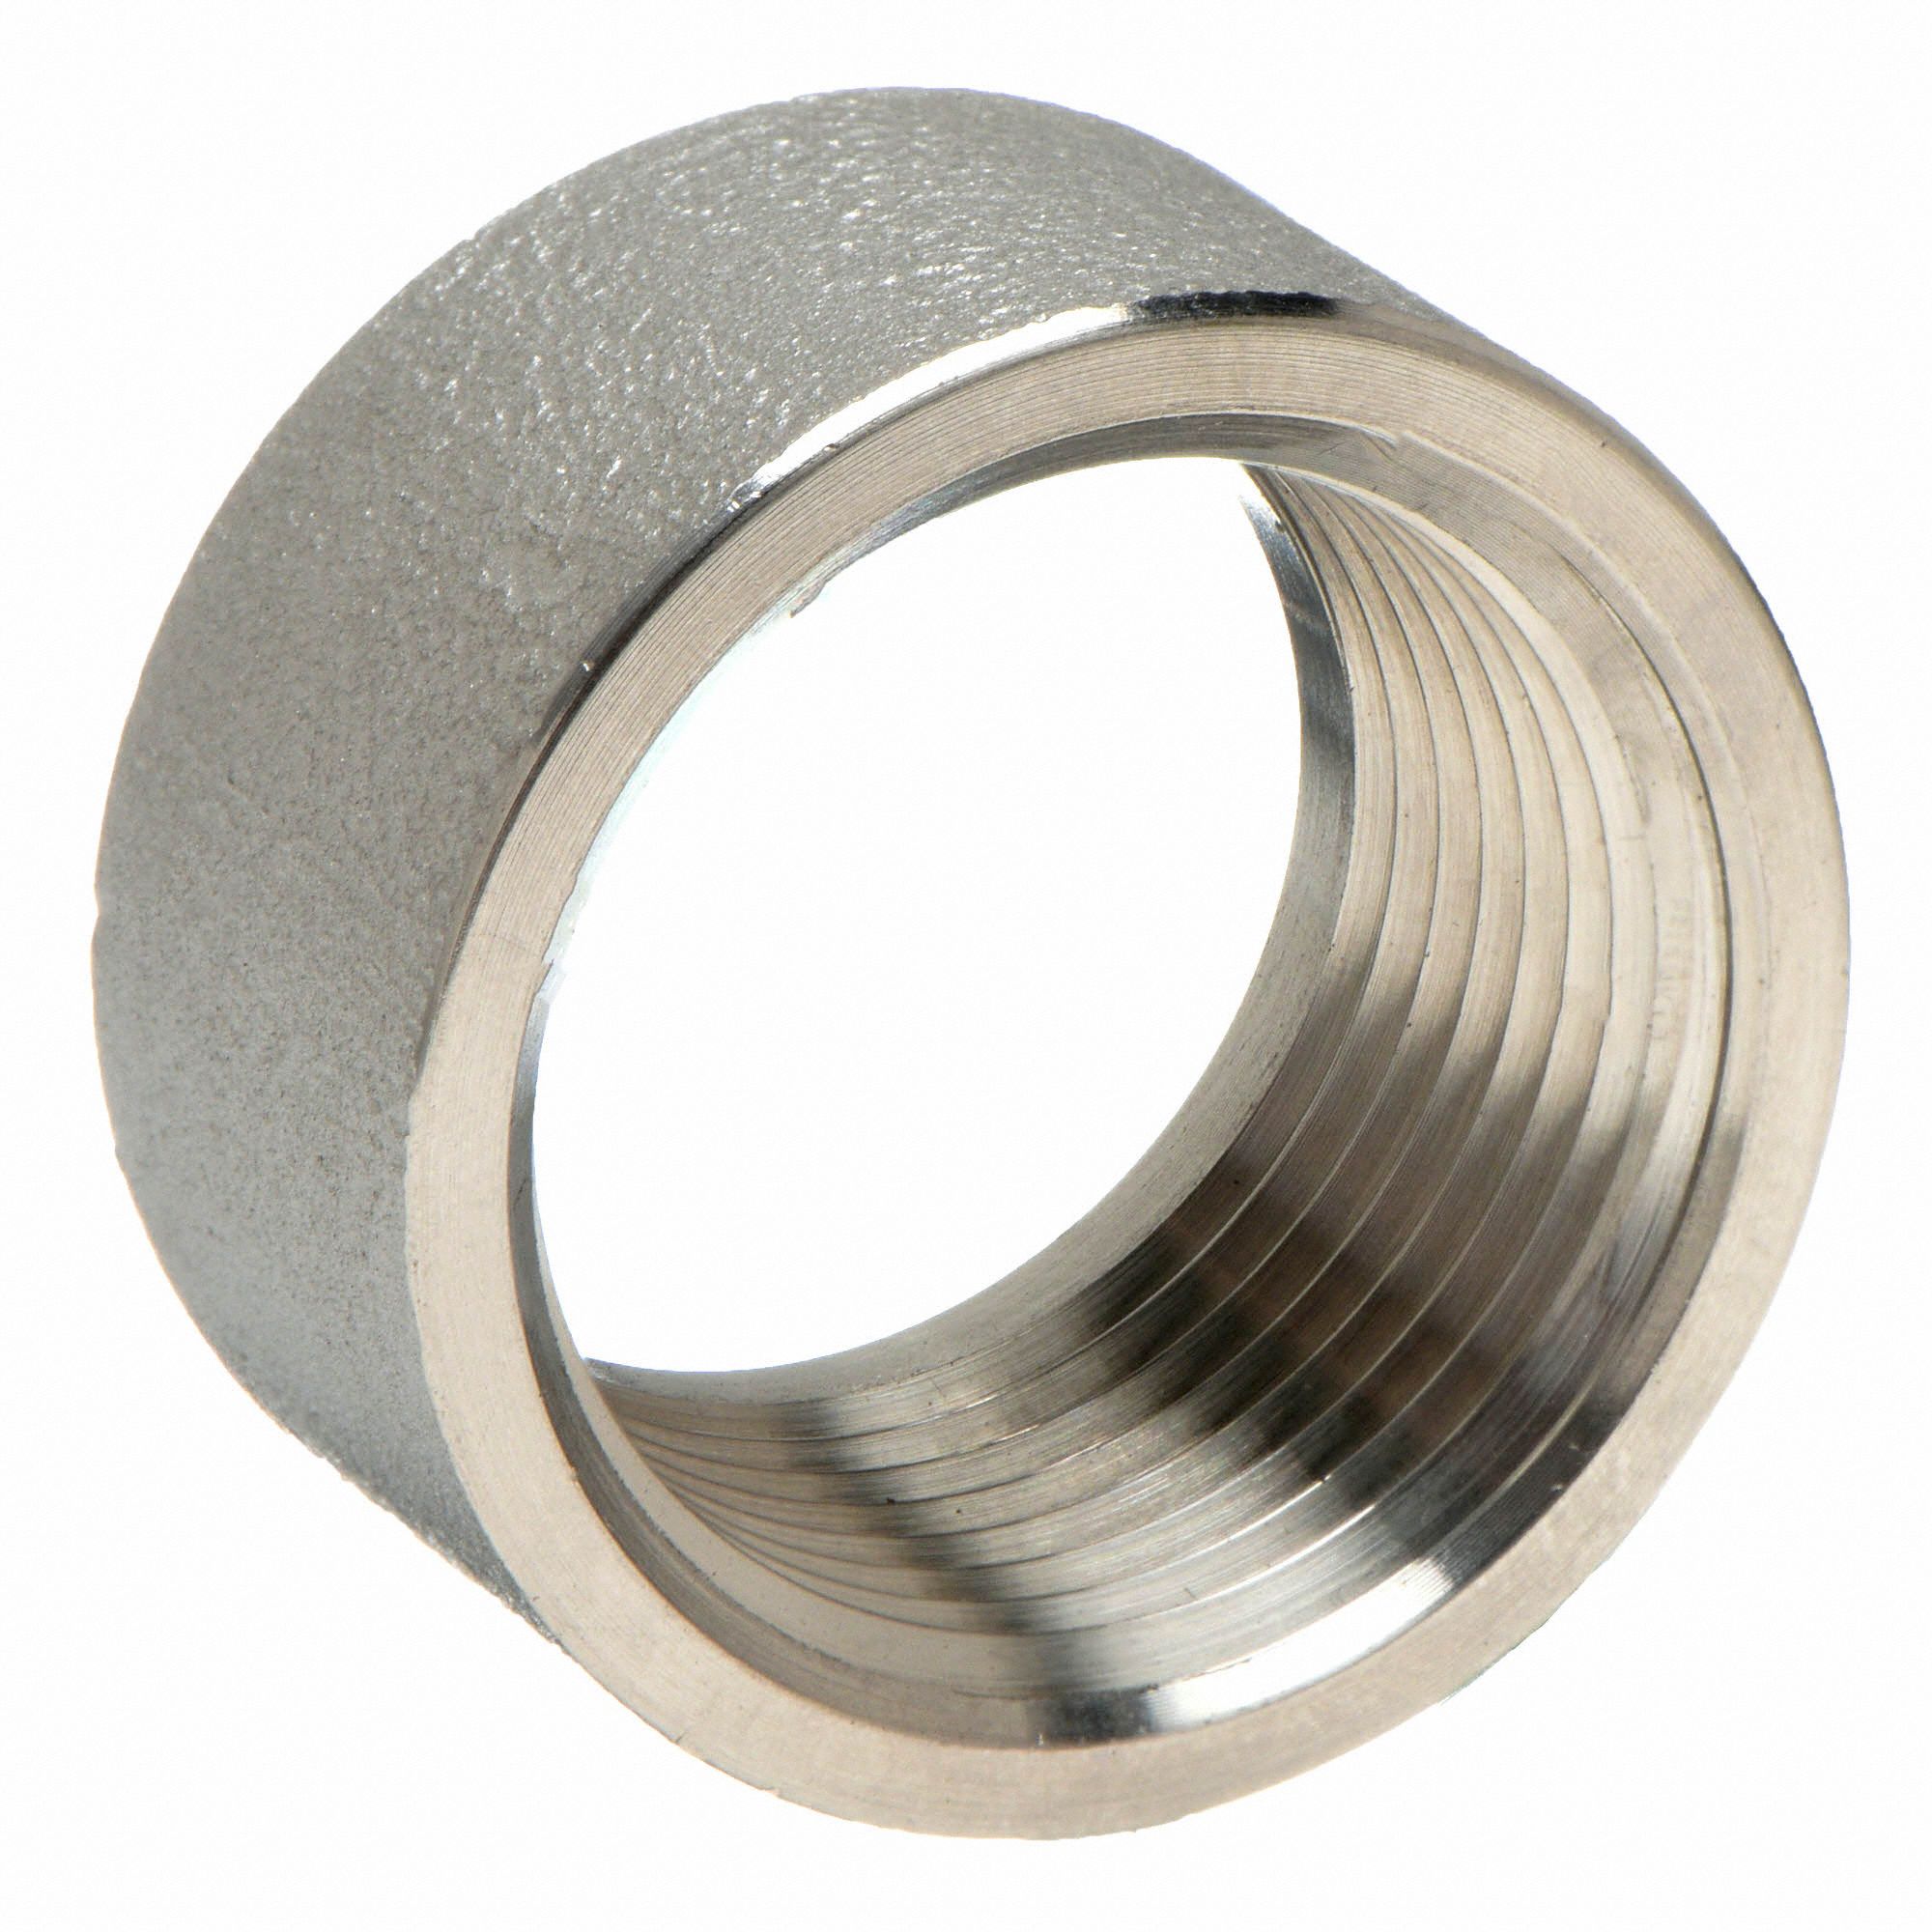 Grainger Approved 304 Stainless Steel Half Coupling Fnpt 18 In Pipe Size Pipe Fitting 3056